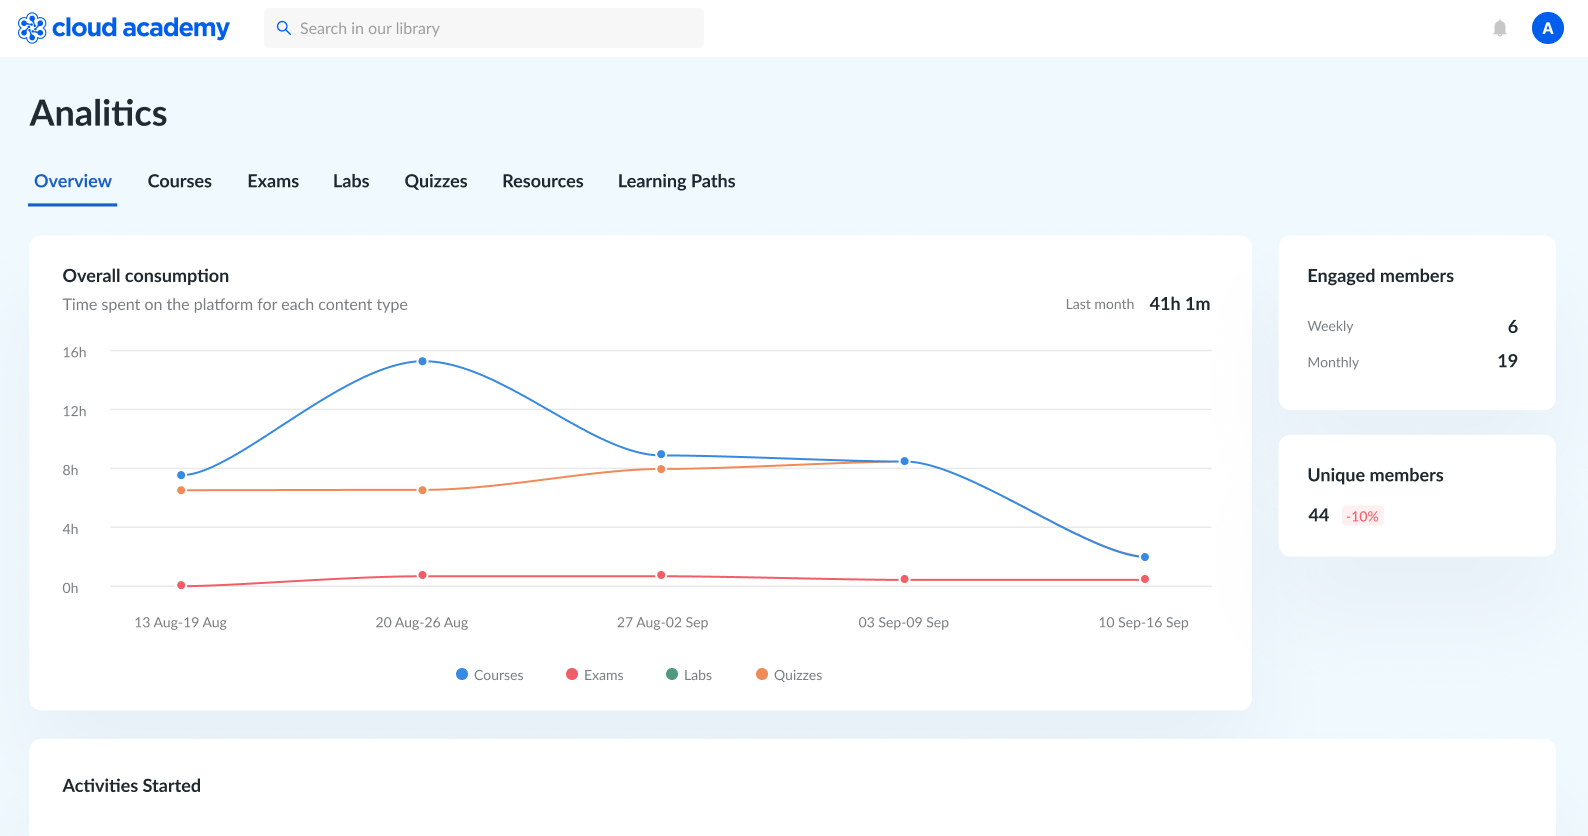 Cloud Academy delivers data insights 70% faster with Cube Cloud's semantic layer